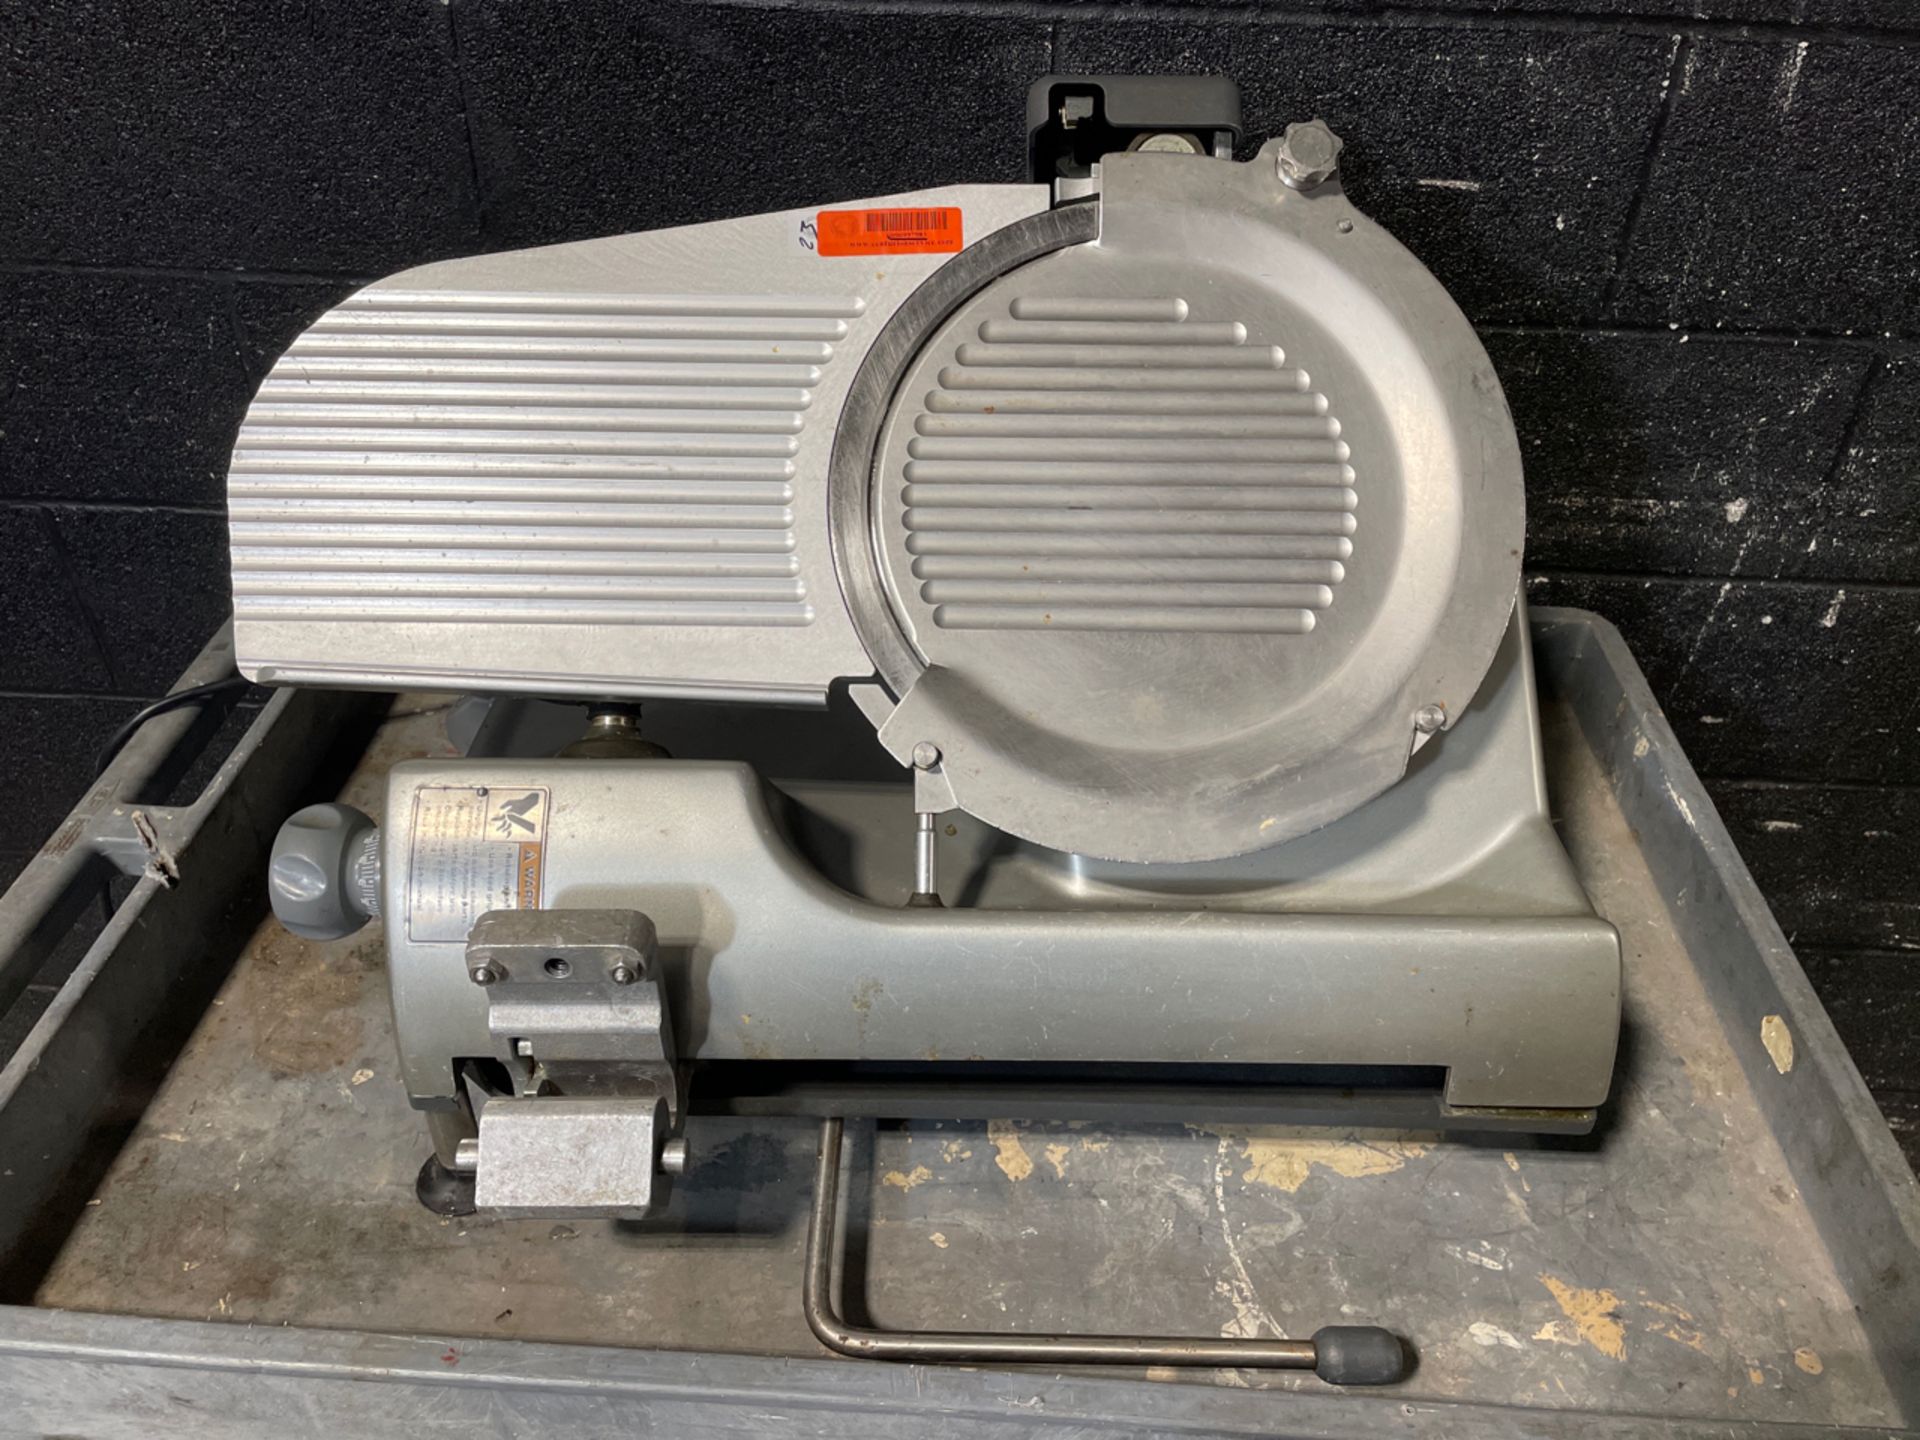 HOBART HS9N ELECTRIC MEAT SLICER (LOCATED AT 151 REGAL ROW STE 231 DALLAS TX, 75247)